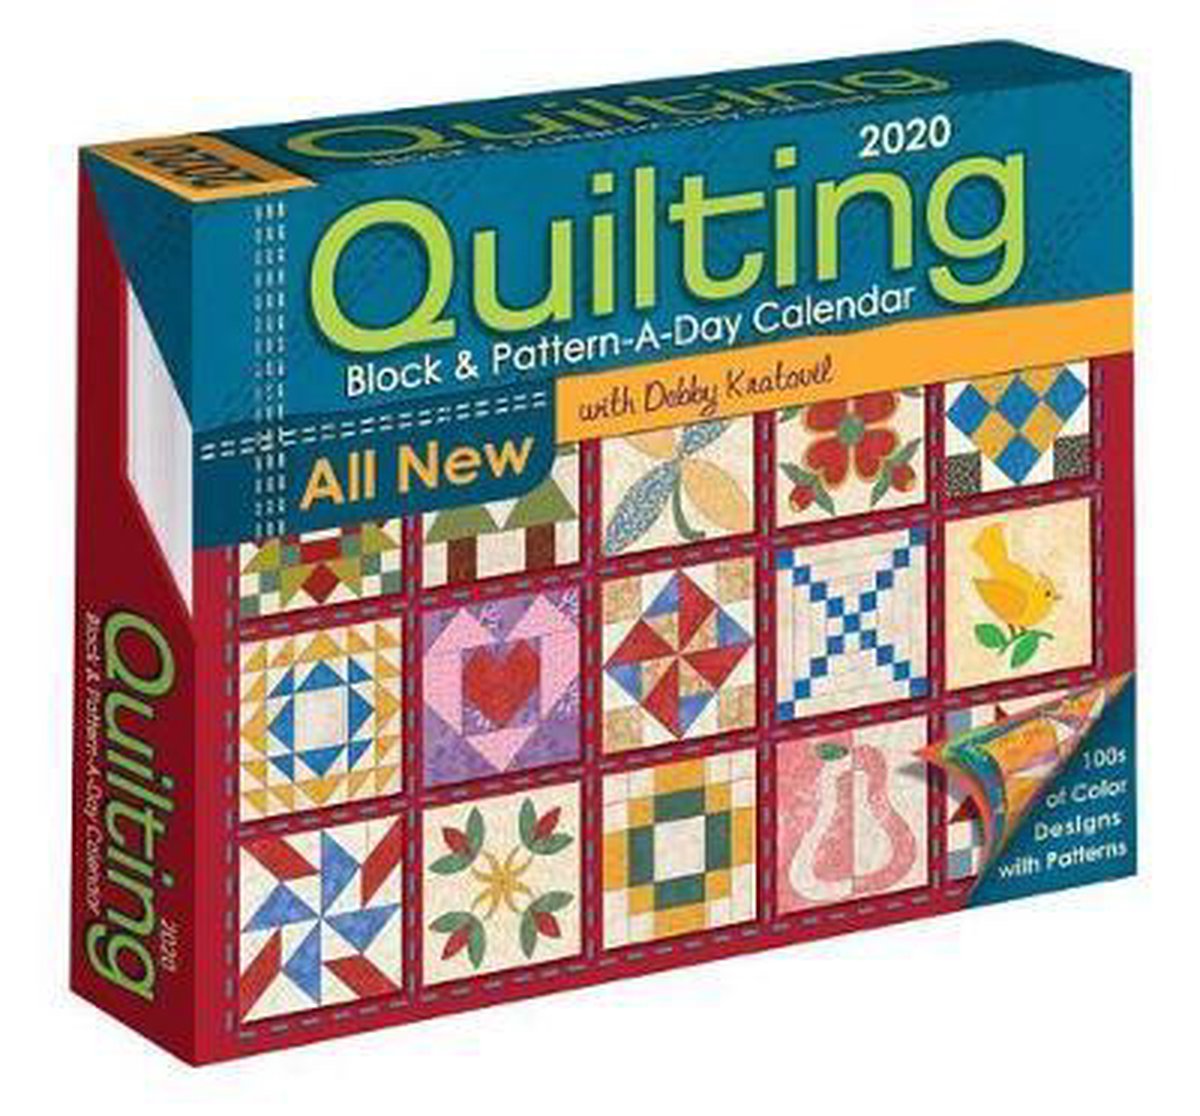 Quilting Block and Pattern-a-Day 2020 Activity Calendar - Debby Kratovil